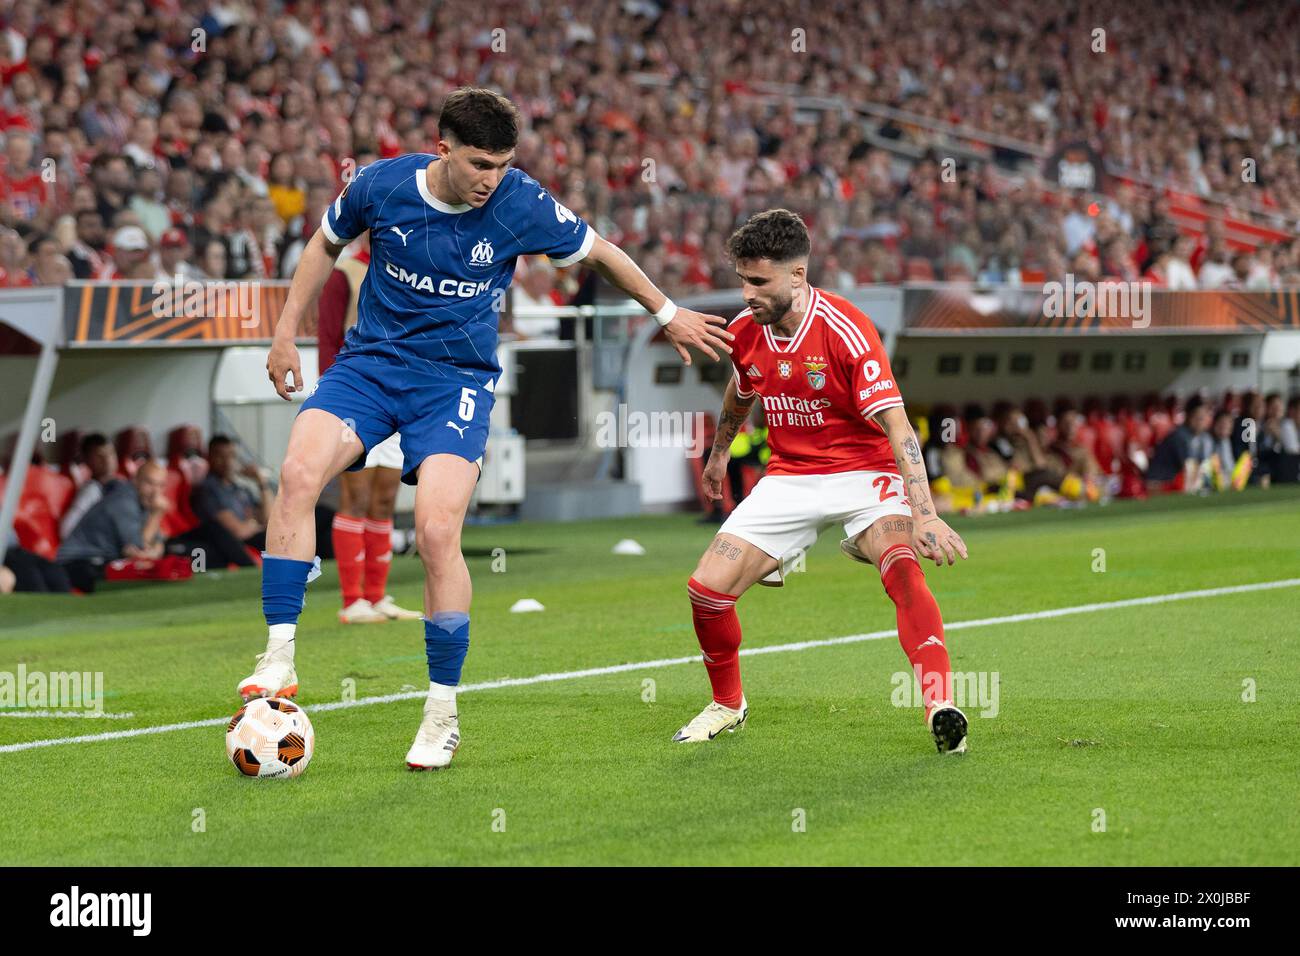 April 11, 2024. Lisbon, Portugal. Marseille's defender from Switzerland Ulisses Garcia (6) and Benfica's forward from Portugal Rafa Silva (27) in action during the game of the 1st Leg of Quarter Finals for the UEFA Europa League Playoffs, SL Benfica vs Olympique de Marseille Credit: Alexandre de Sousa/Alamy Live News Stock Photo